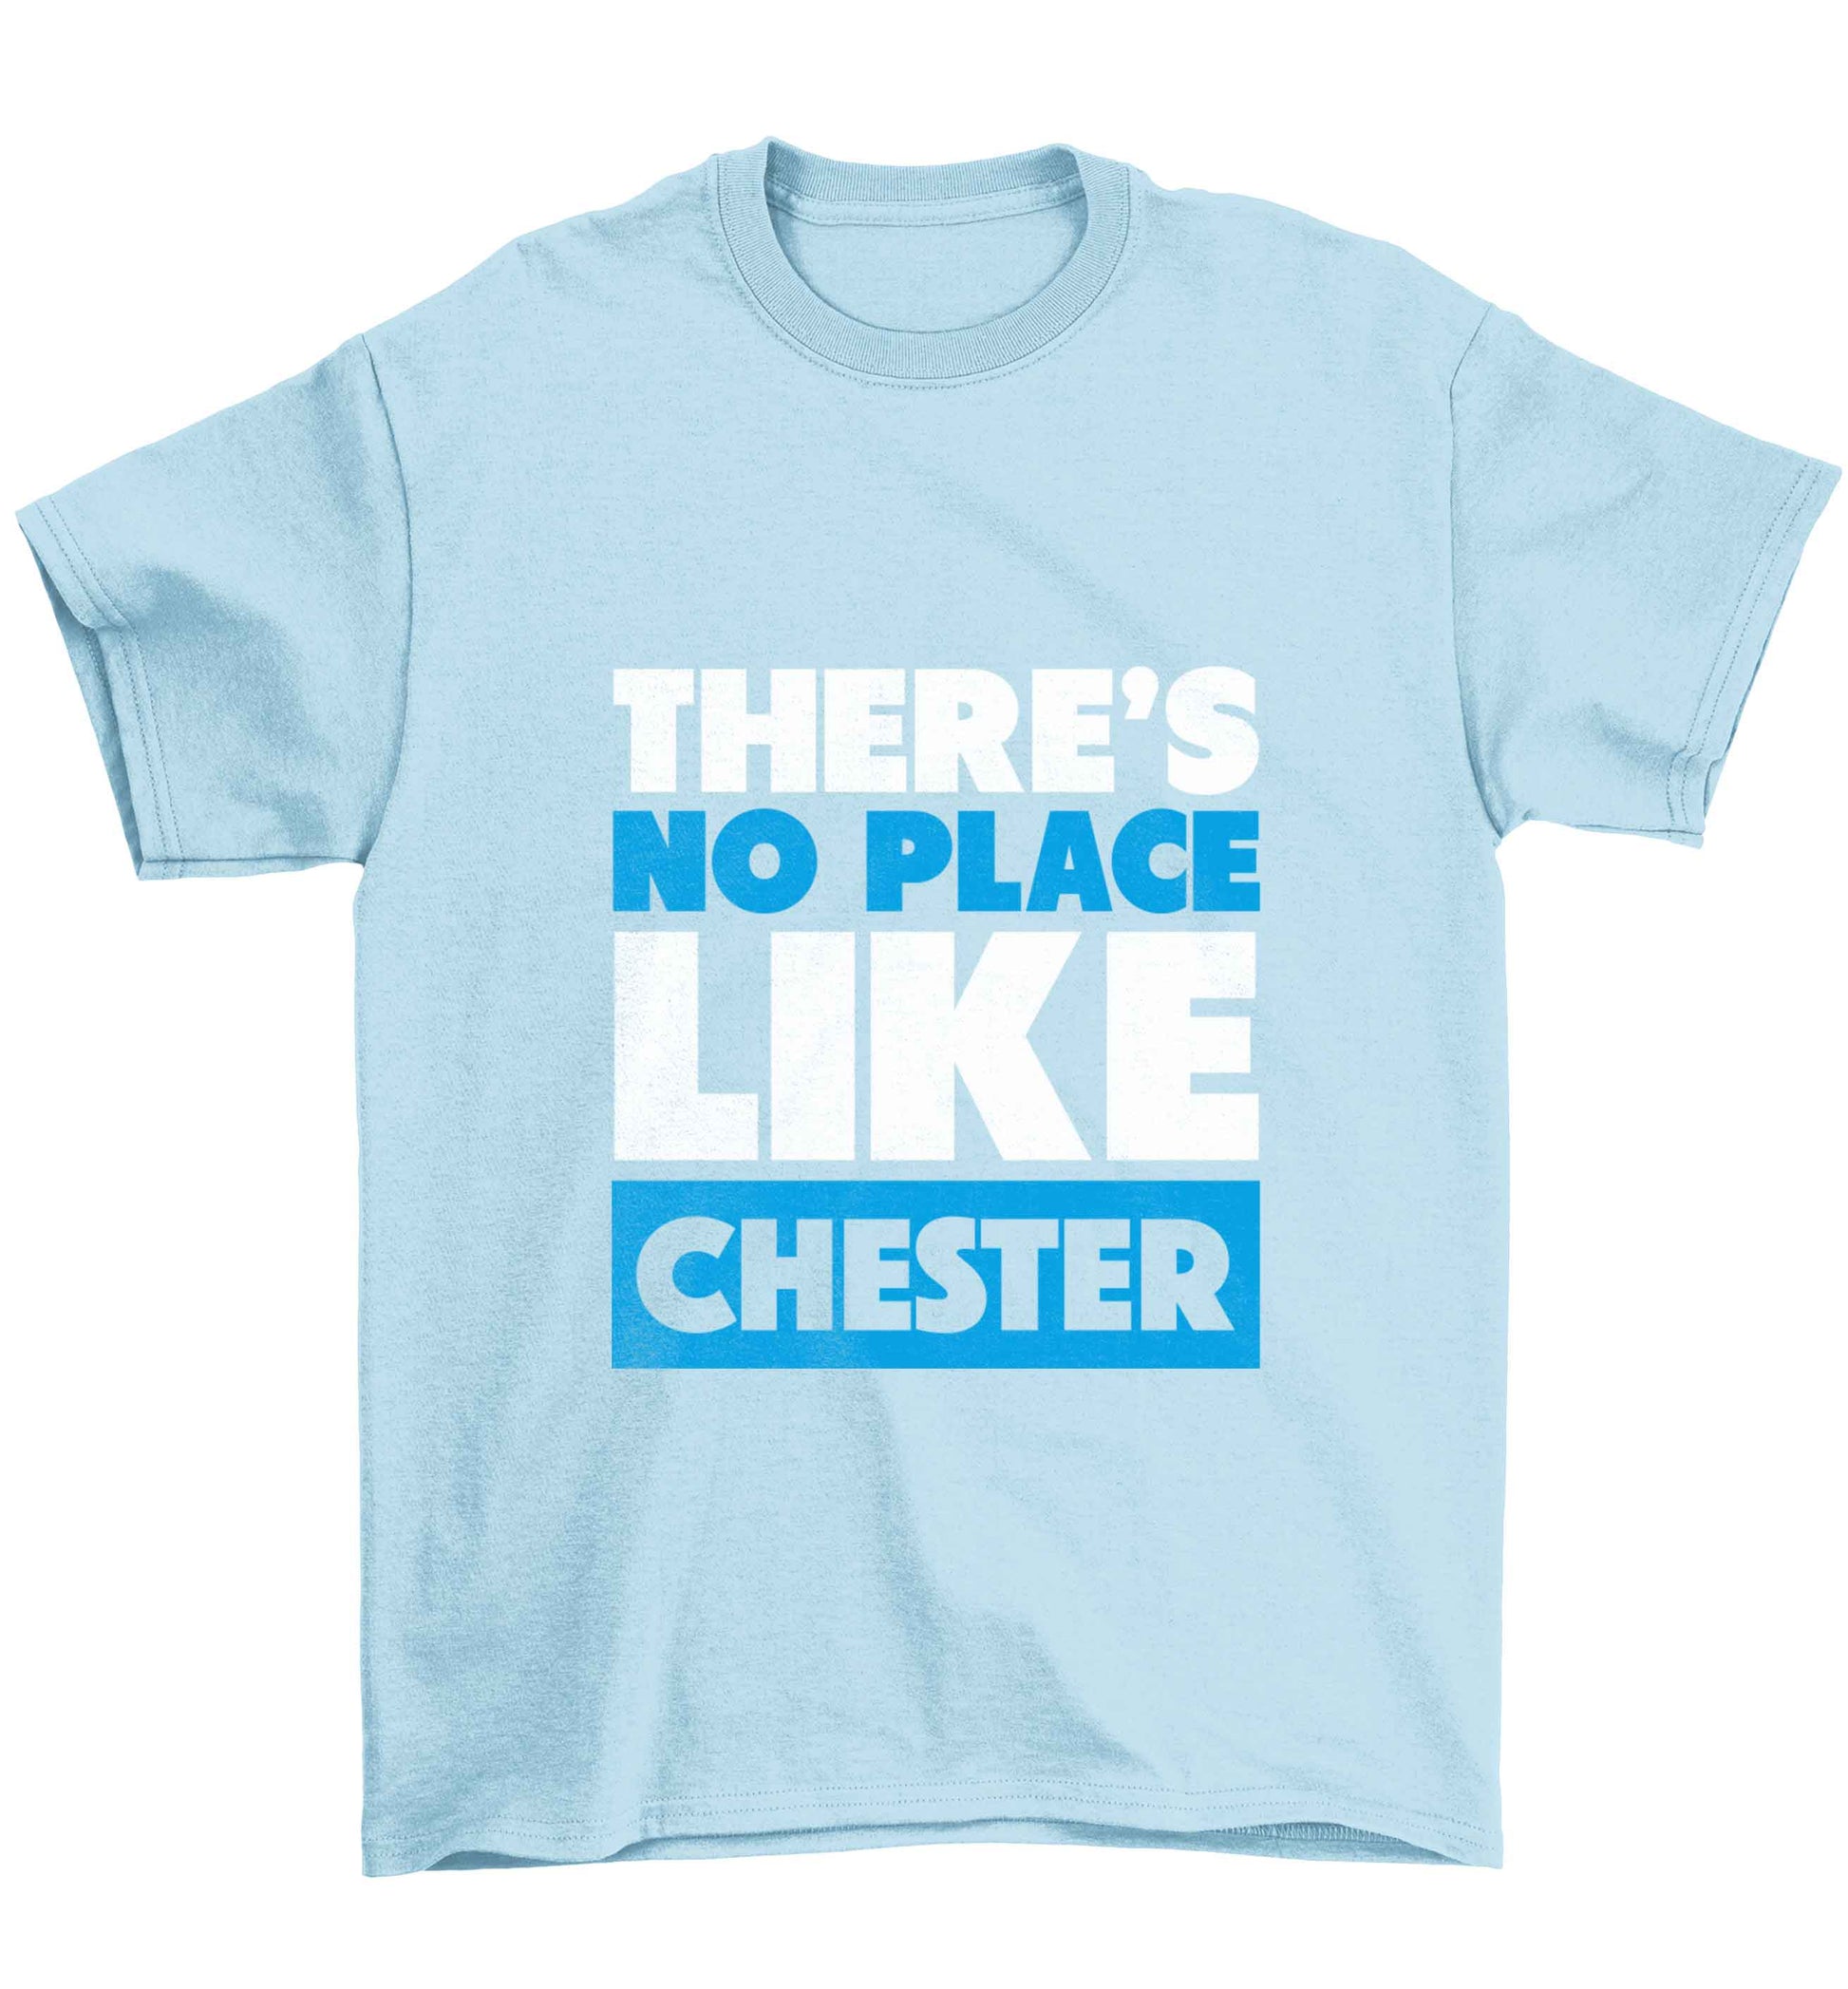 There's no place like Chester Children's light blue Tshirt 12-13 Years